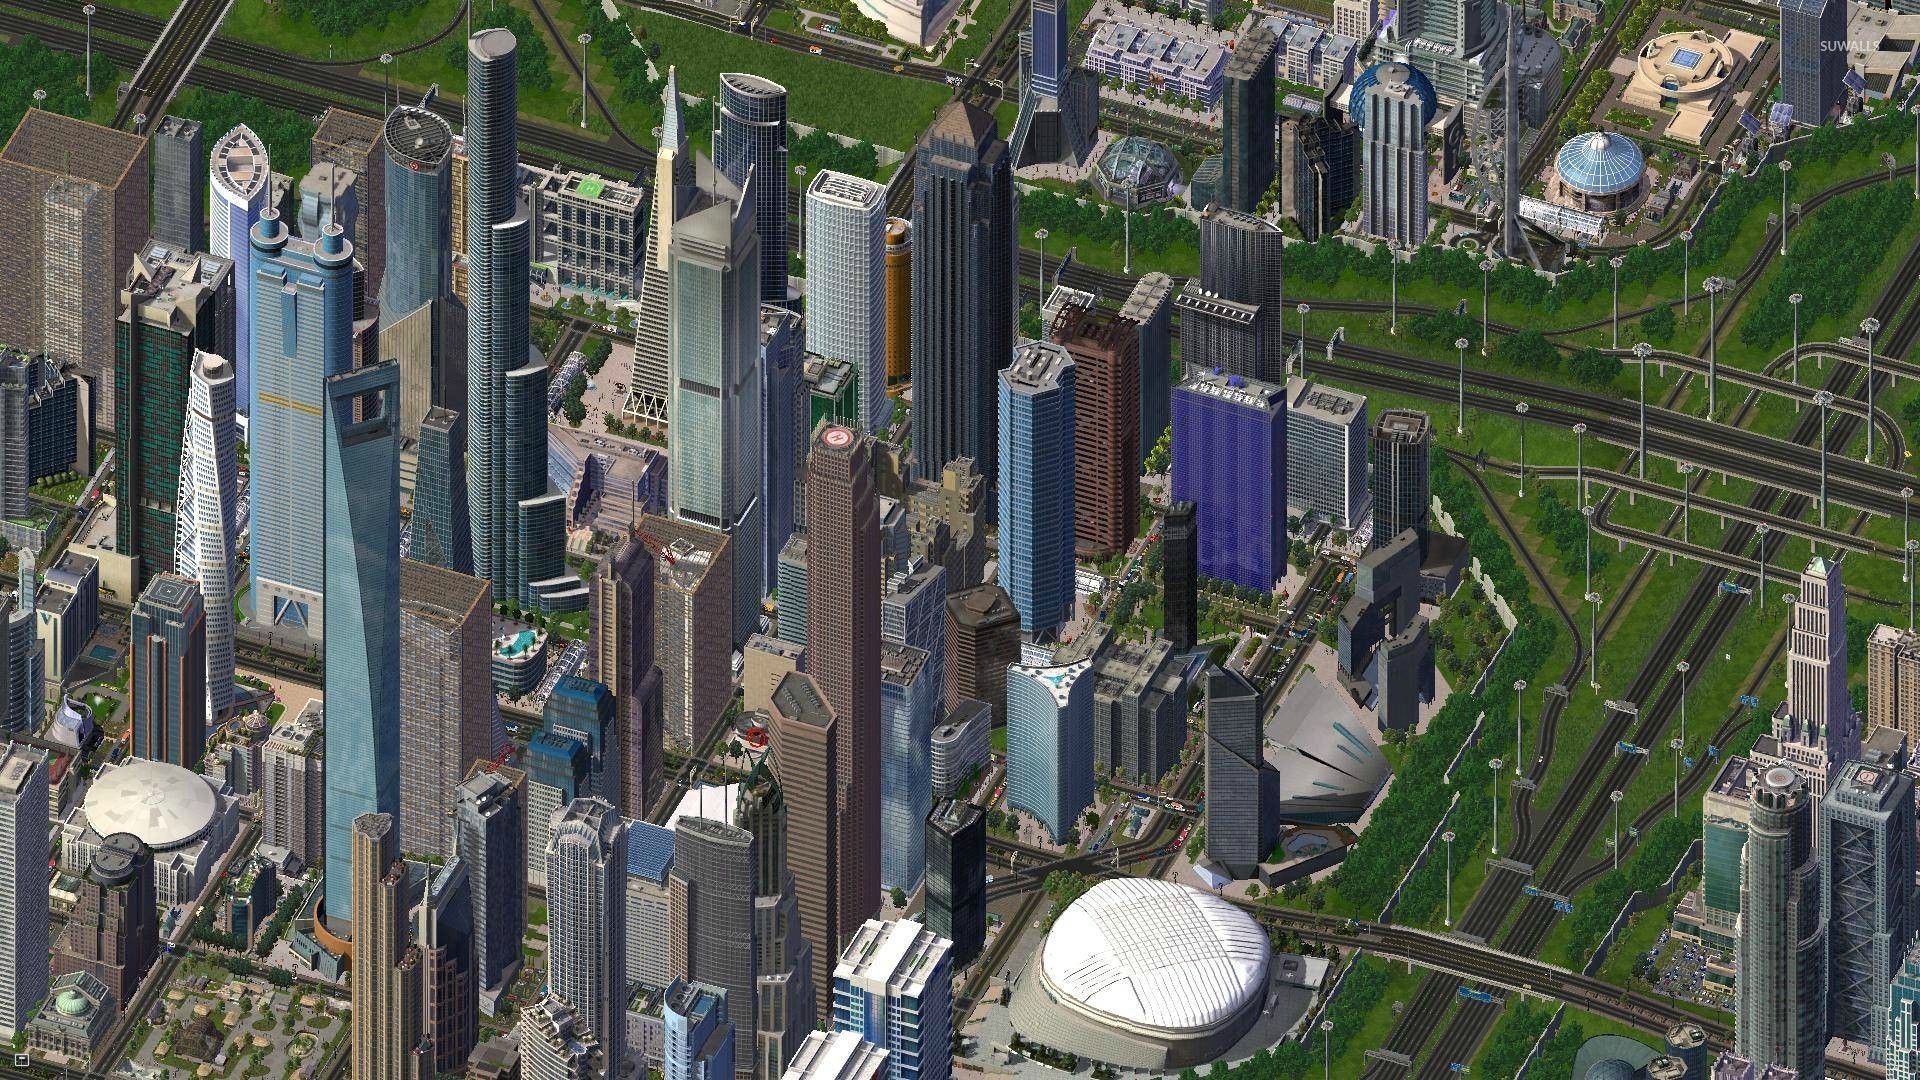 SimCity 2000 Wallpapers